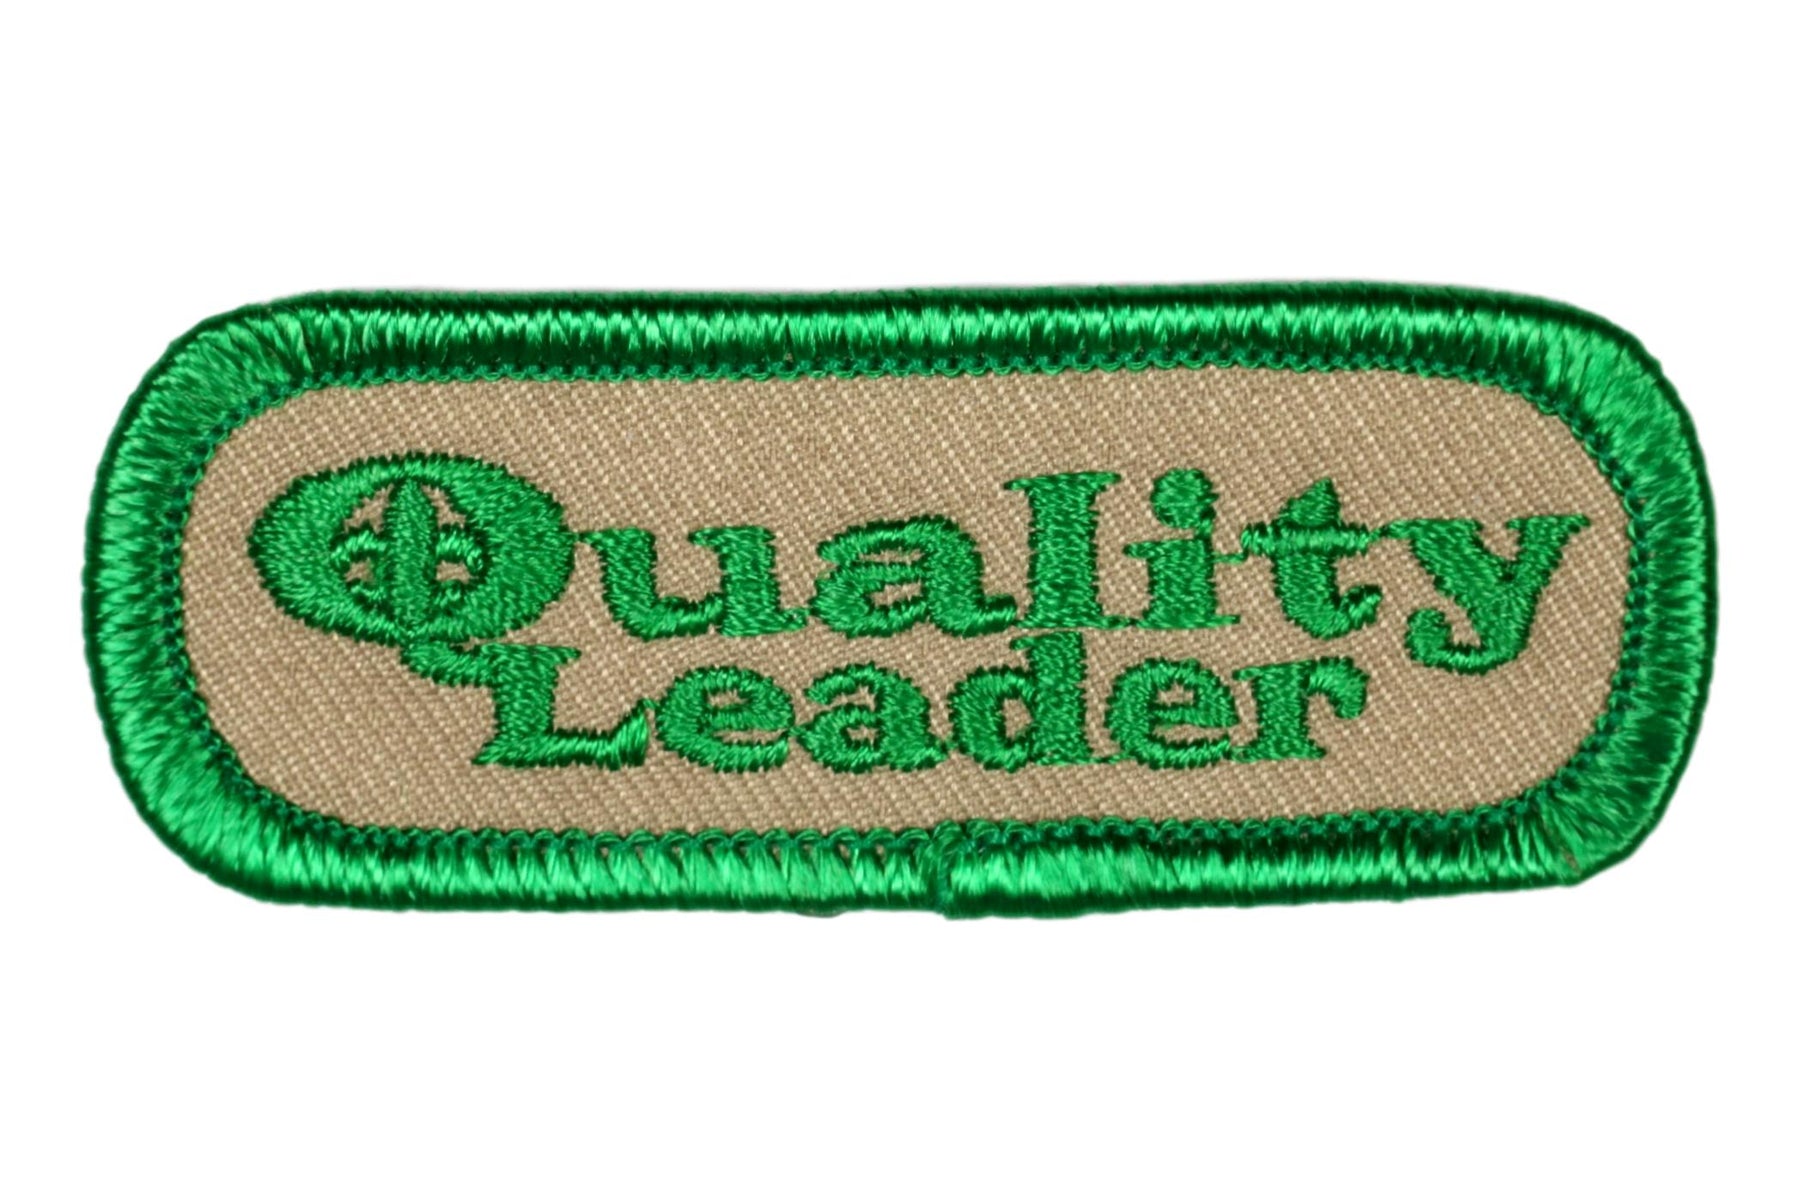 Quality Leader Patch Green